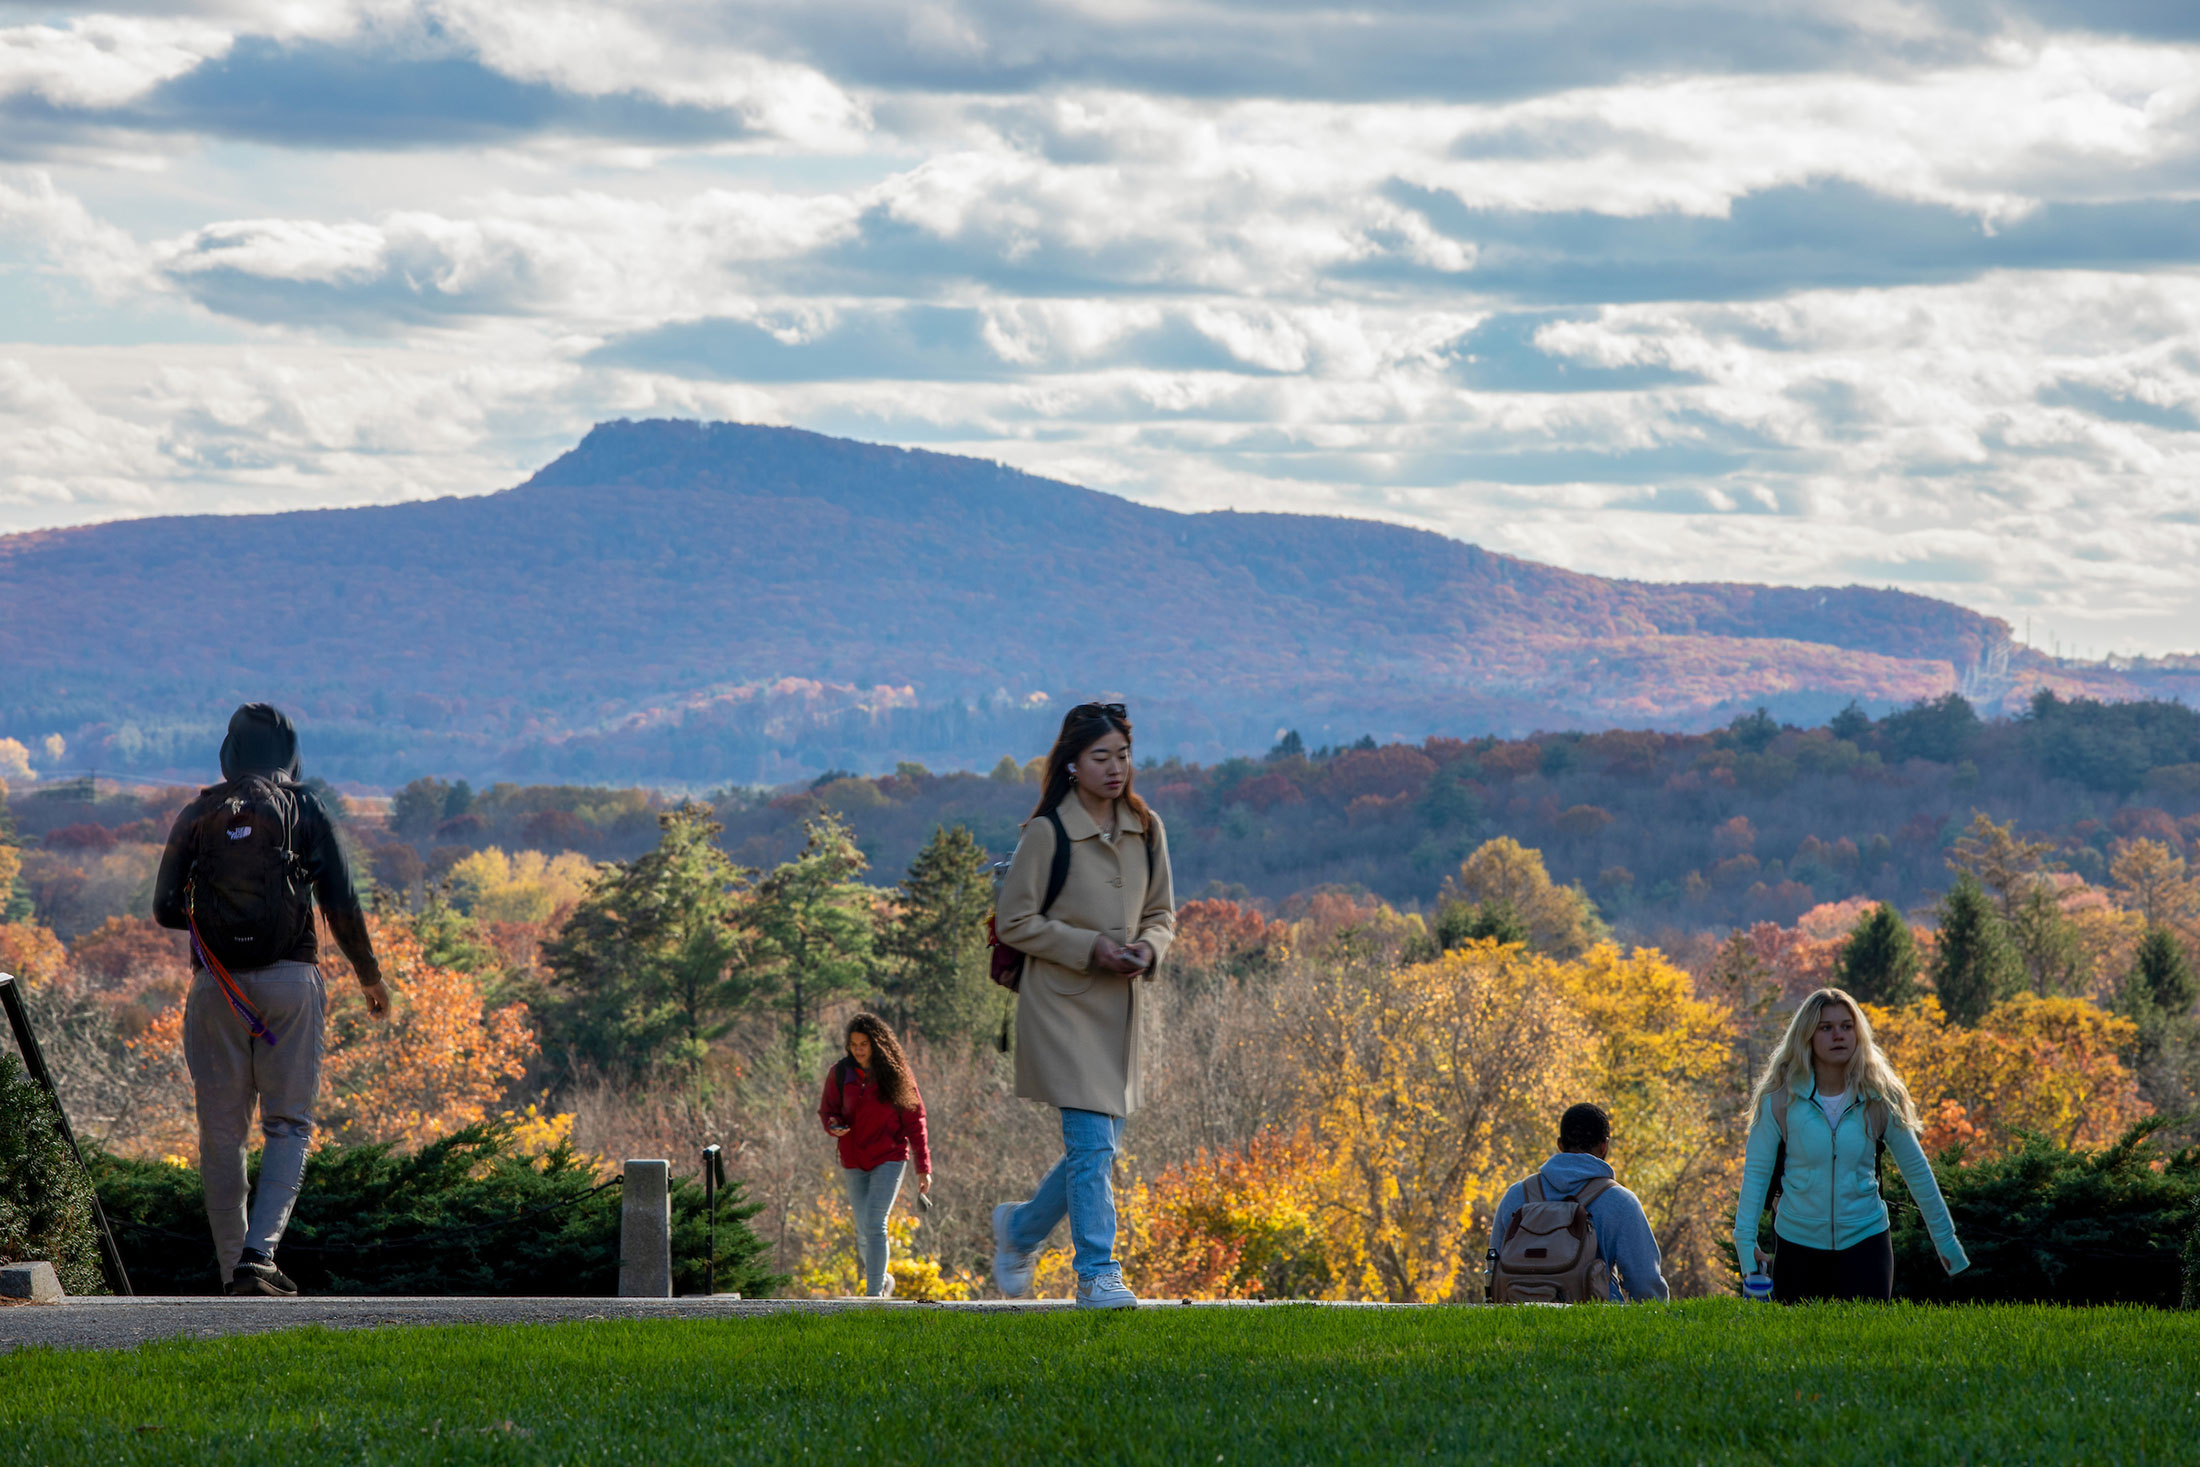 Students walking on campus with the Mt. Holyoke Range visible behind them.